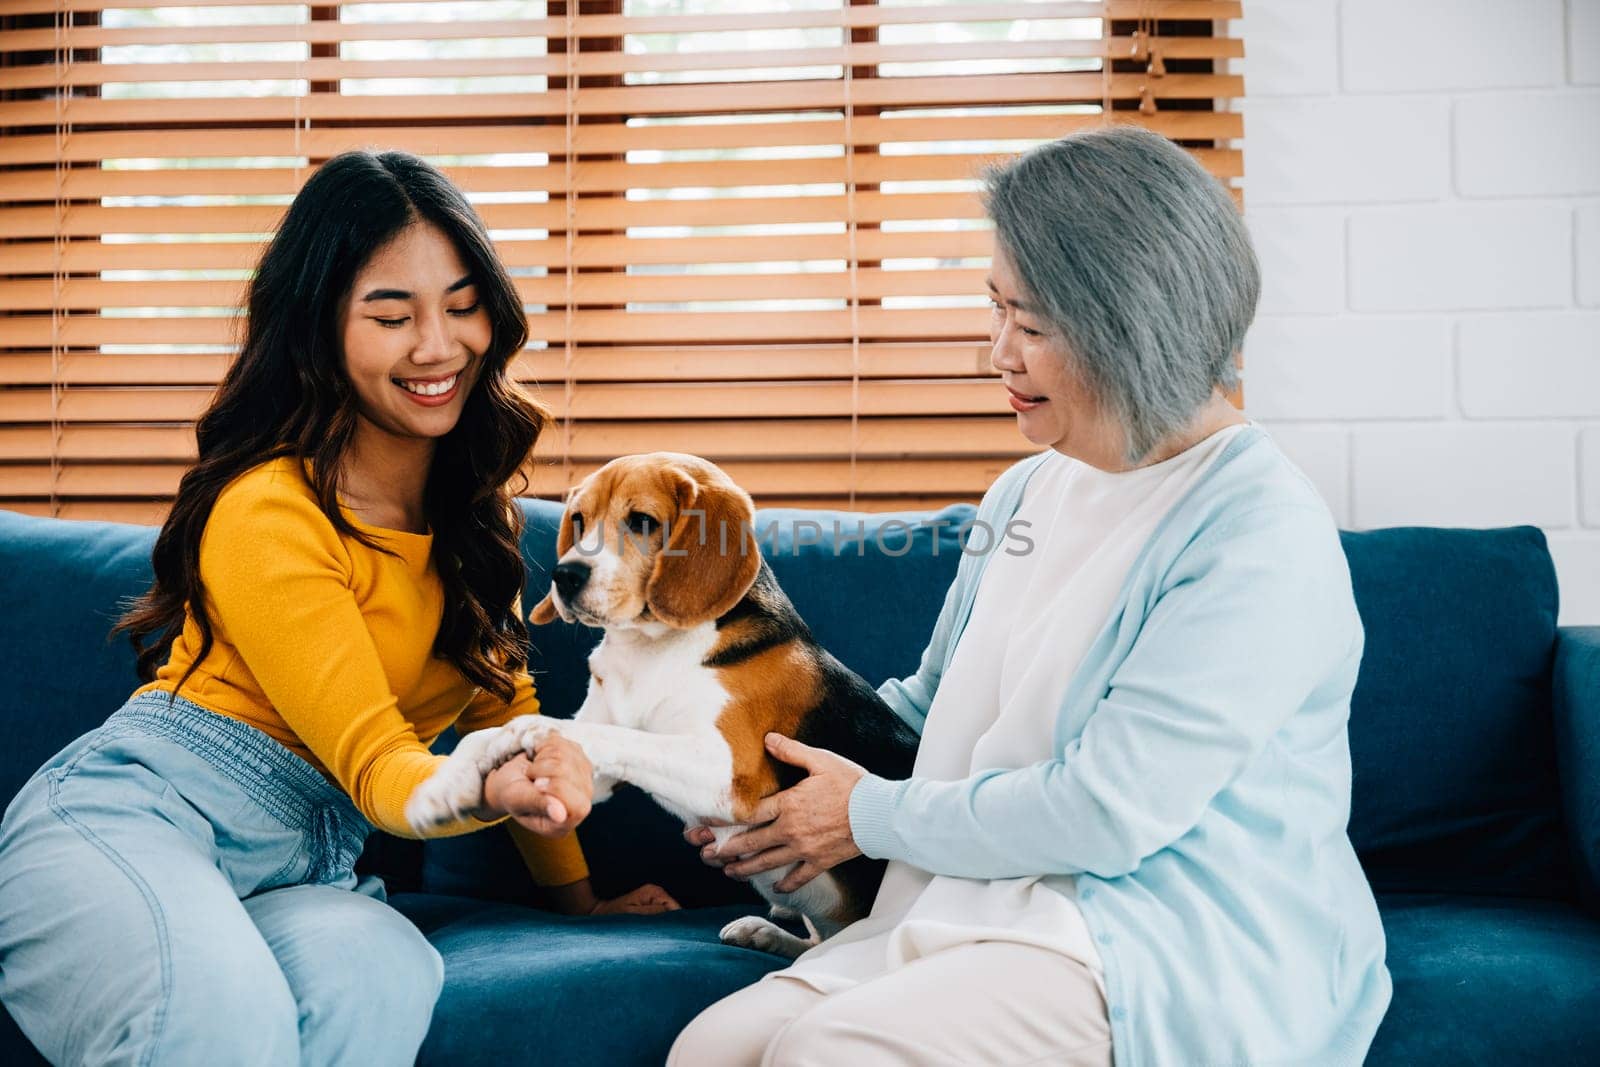 A woman and her mother, along with their Beagle dog, capture a heartwarming family portrait on the sofa at home. Their togetherness and loving bond bring happiness to their lives. Pet love